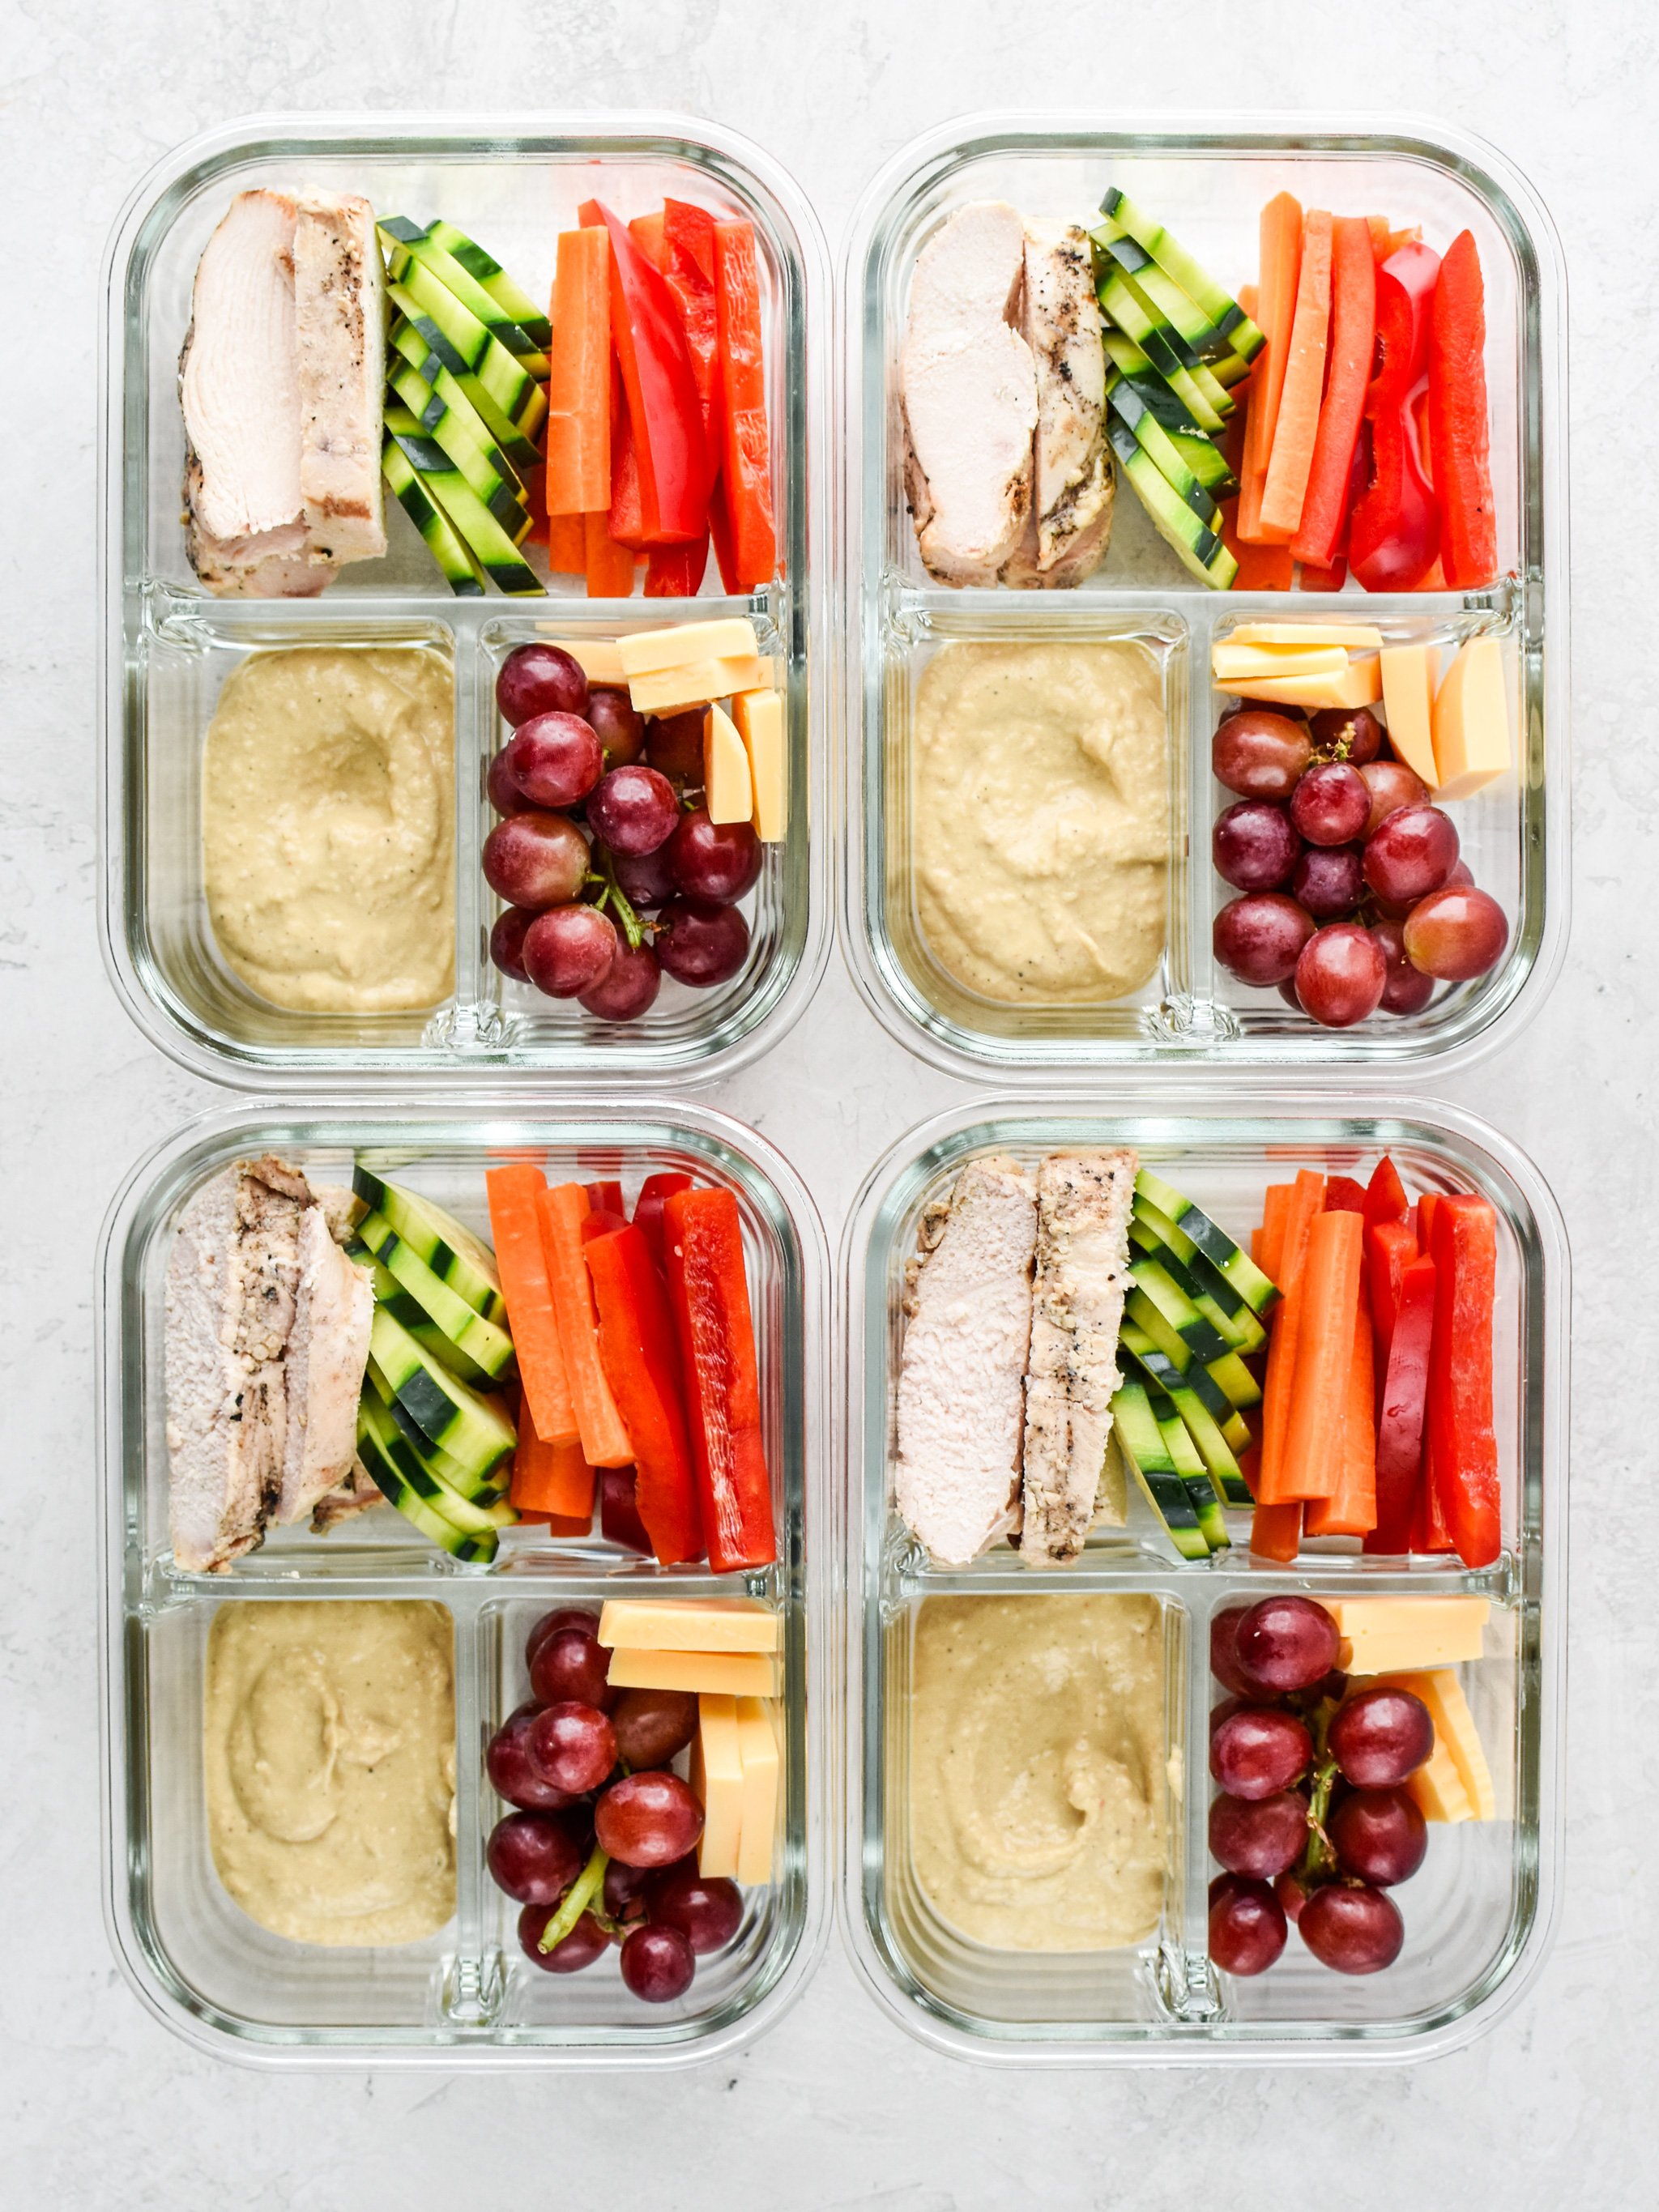 This is the chicken & hummus plate lunch meal prep is a great idea for meal prepping in hot weather.